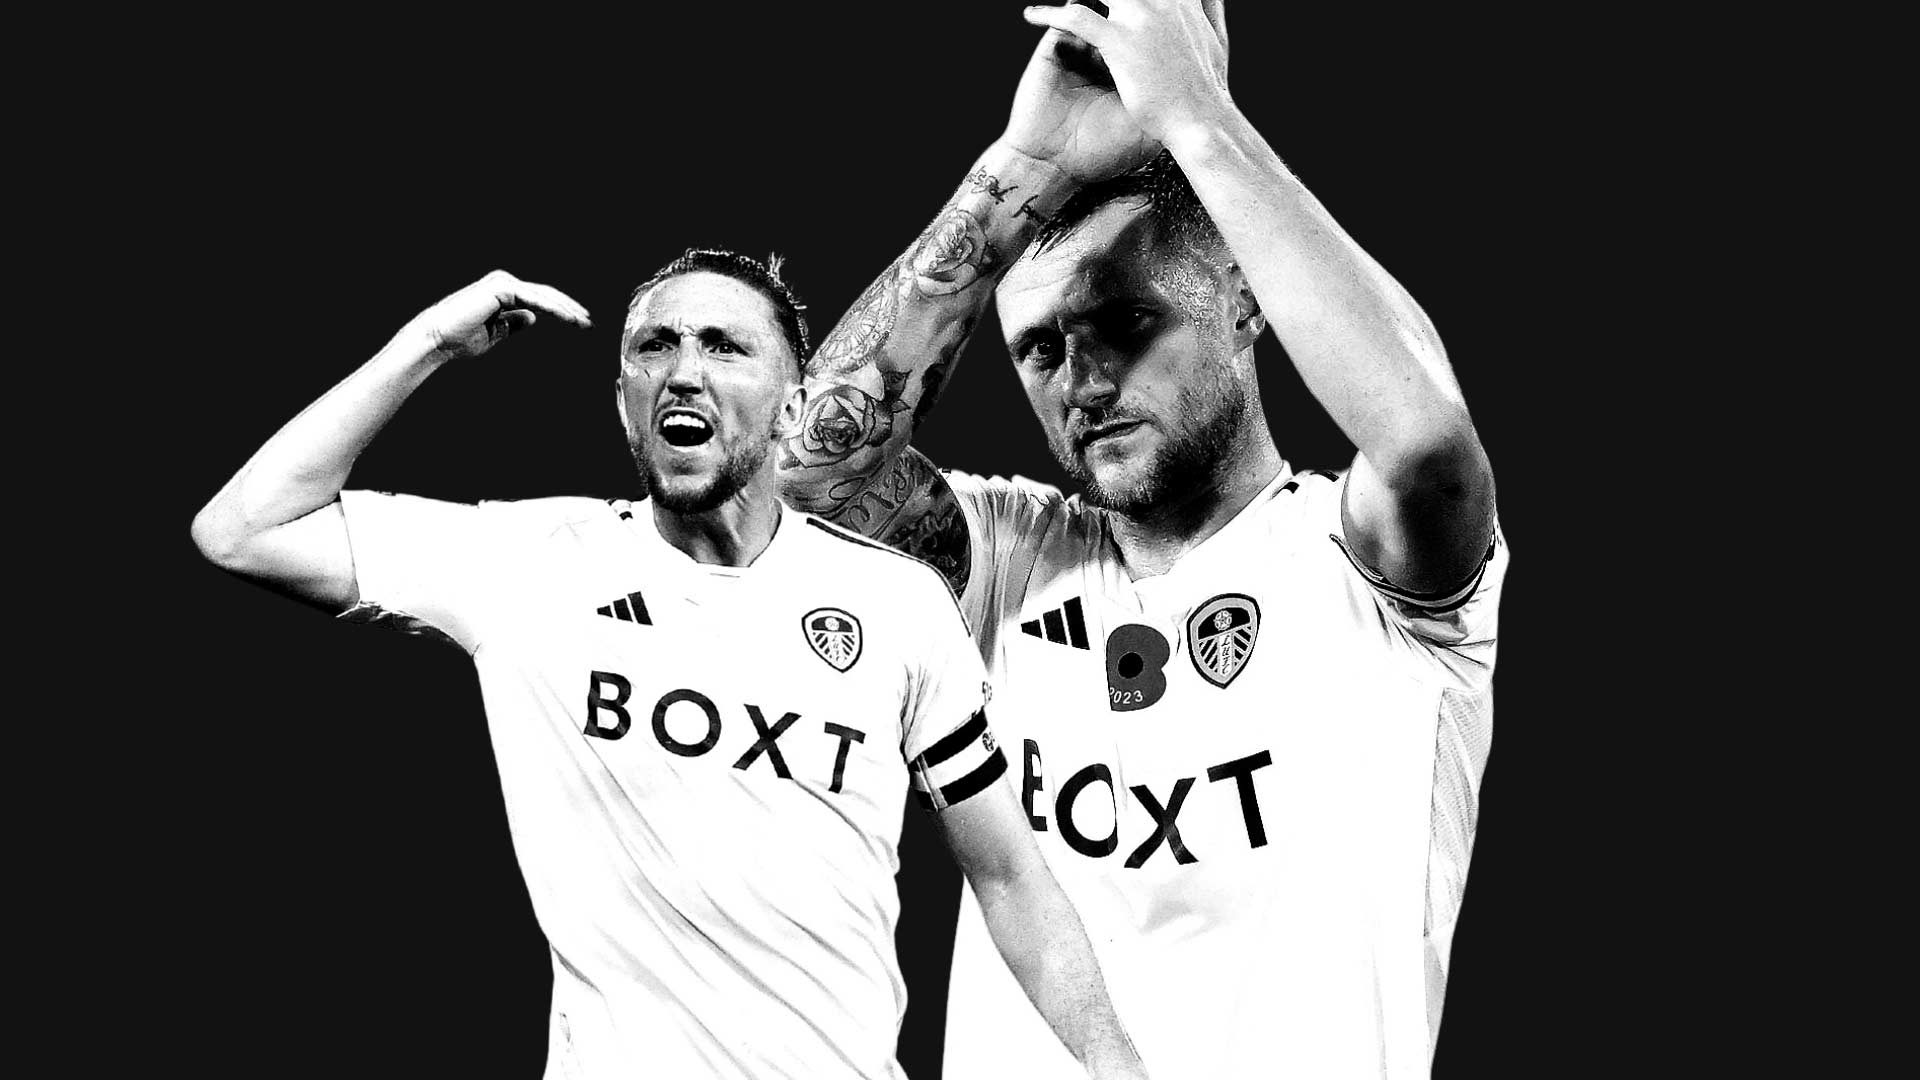 Luke Ayling angrily celebrating his goal against West Brom earlier this season, and Liam Cooper applauding the fans. Can we be their mates?